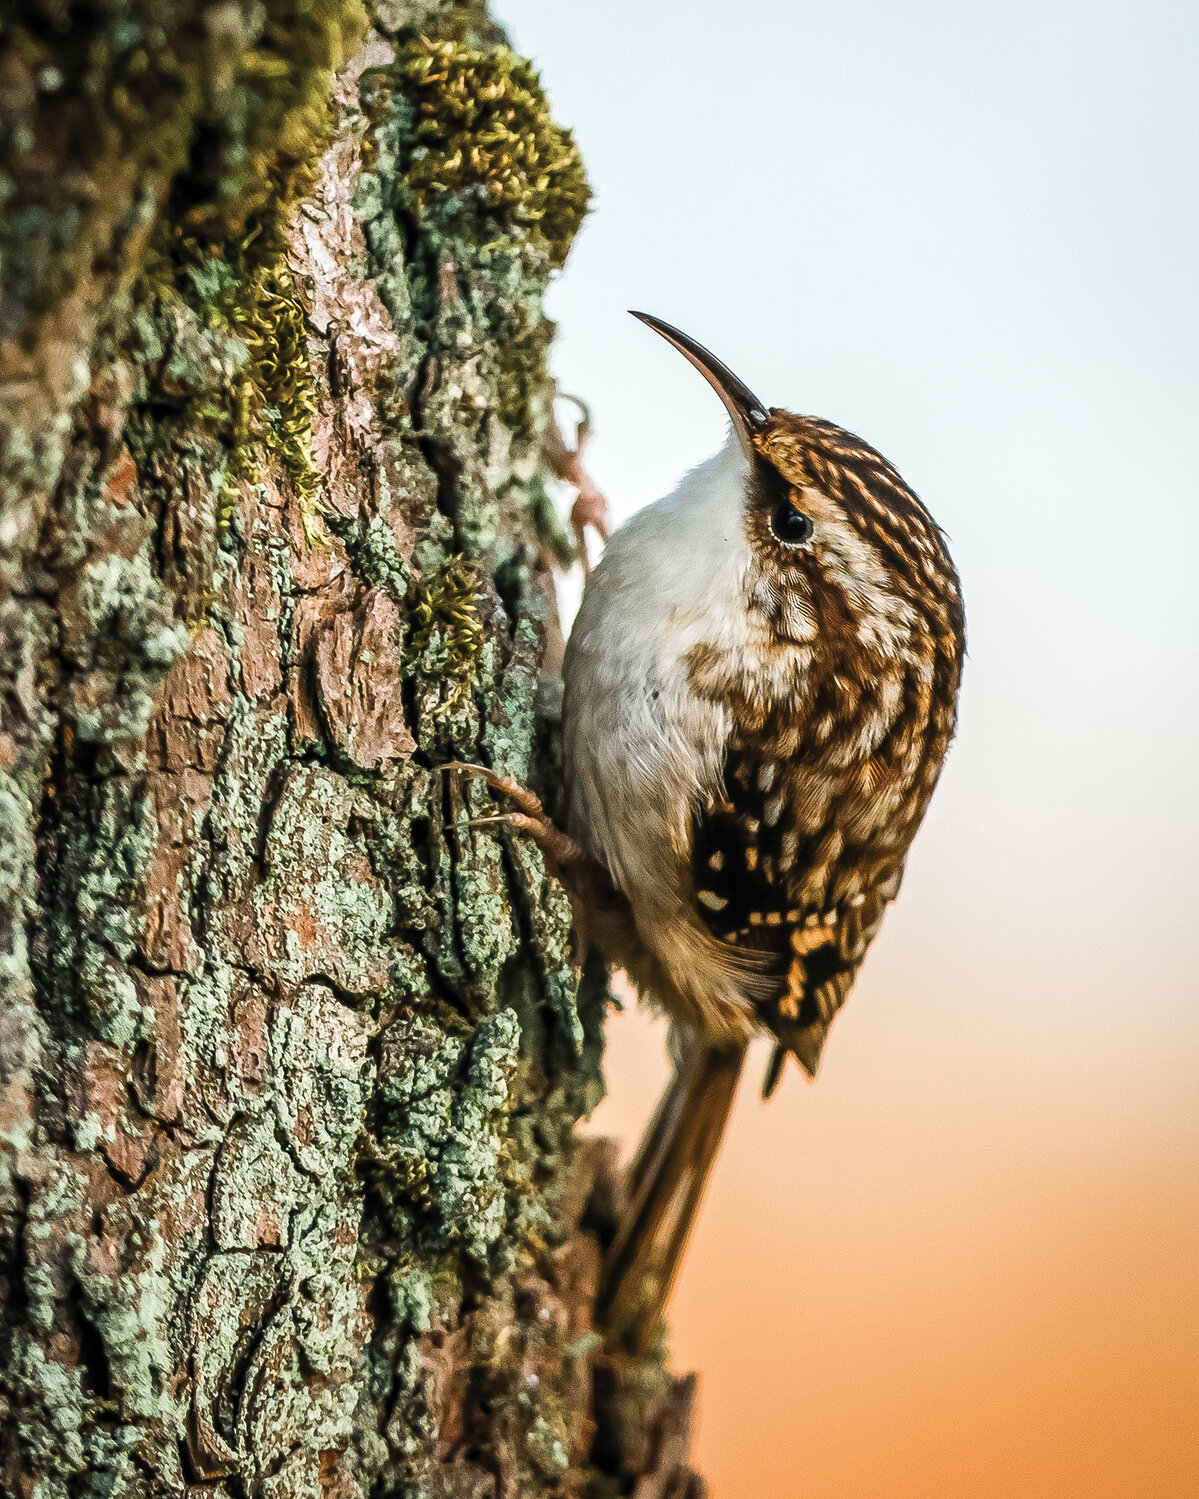 A brown creeper creeps its way up the side of a tree at the Ridgefield National Wildlife Refuge on Nov. 14. Brown creepers search for small insects and spiders by hitching upward in a spiral around tree trunks and limbs, according to allaboutbirds.org.